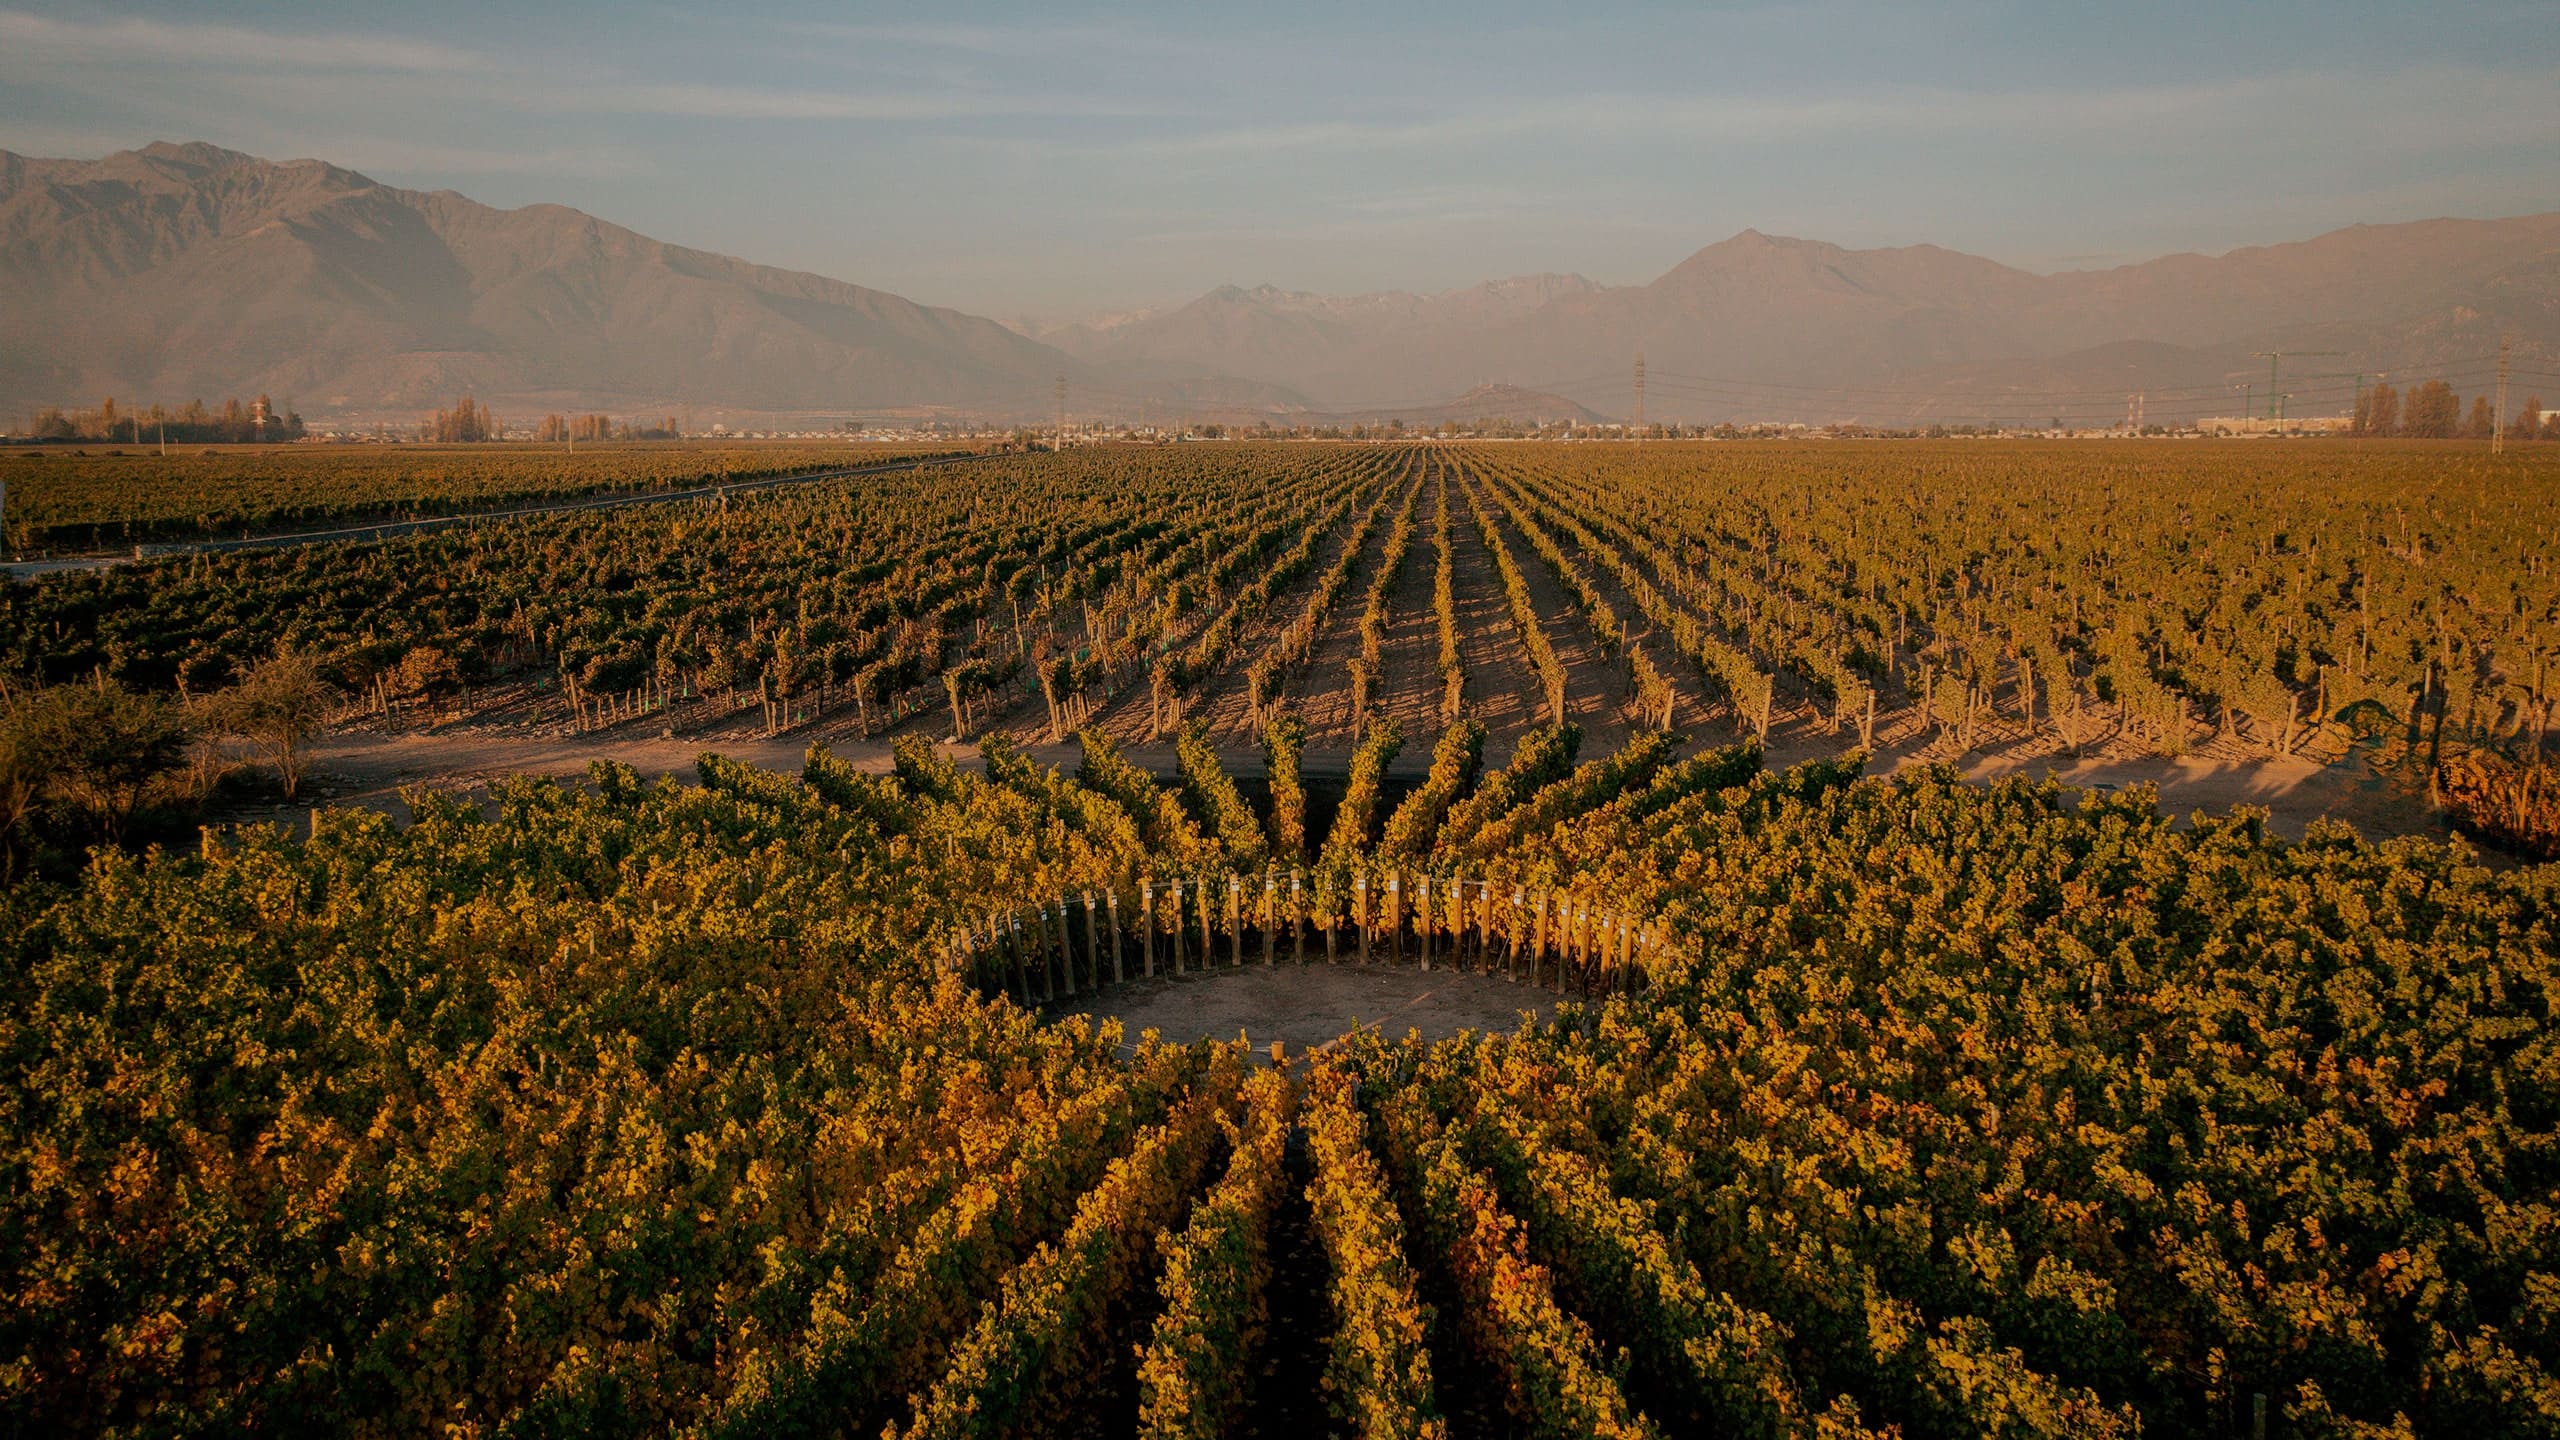 Unprecedented “Sundial Vineyard Project” to advance excellence, innovation and sustainability